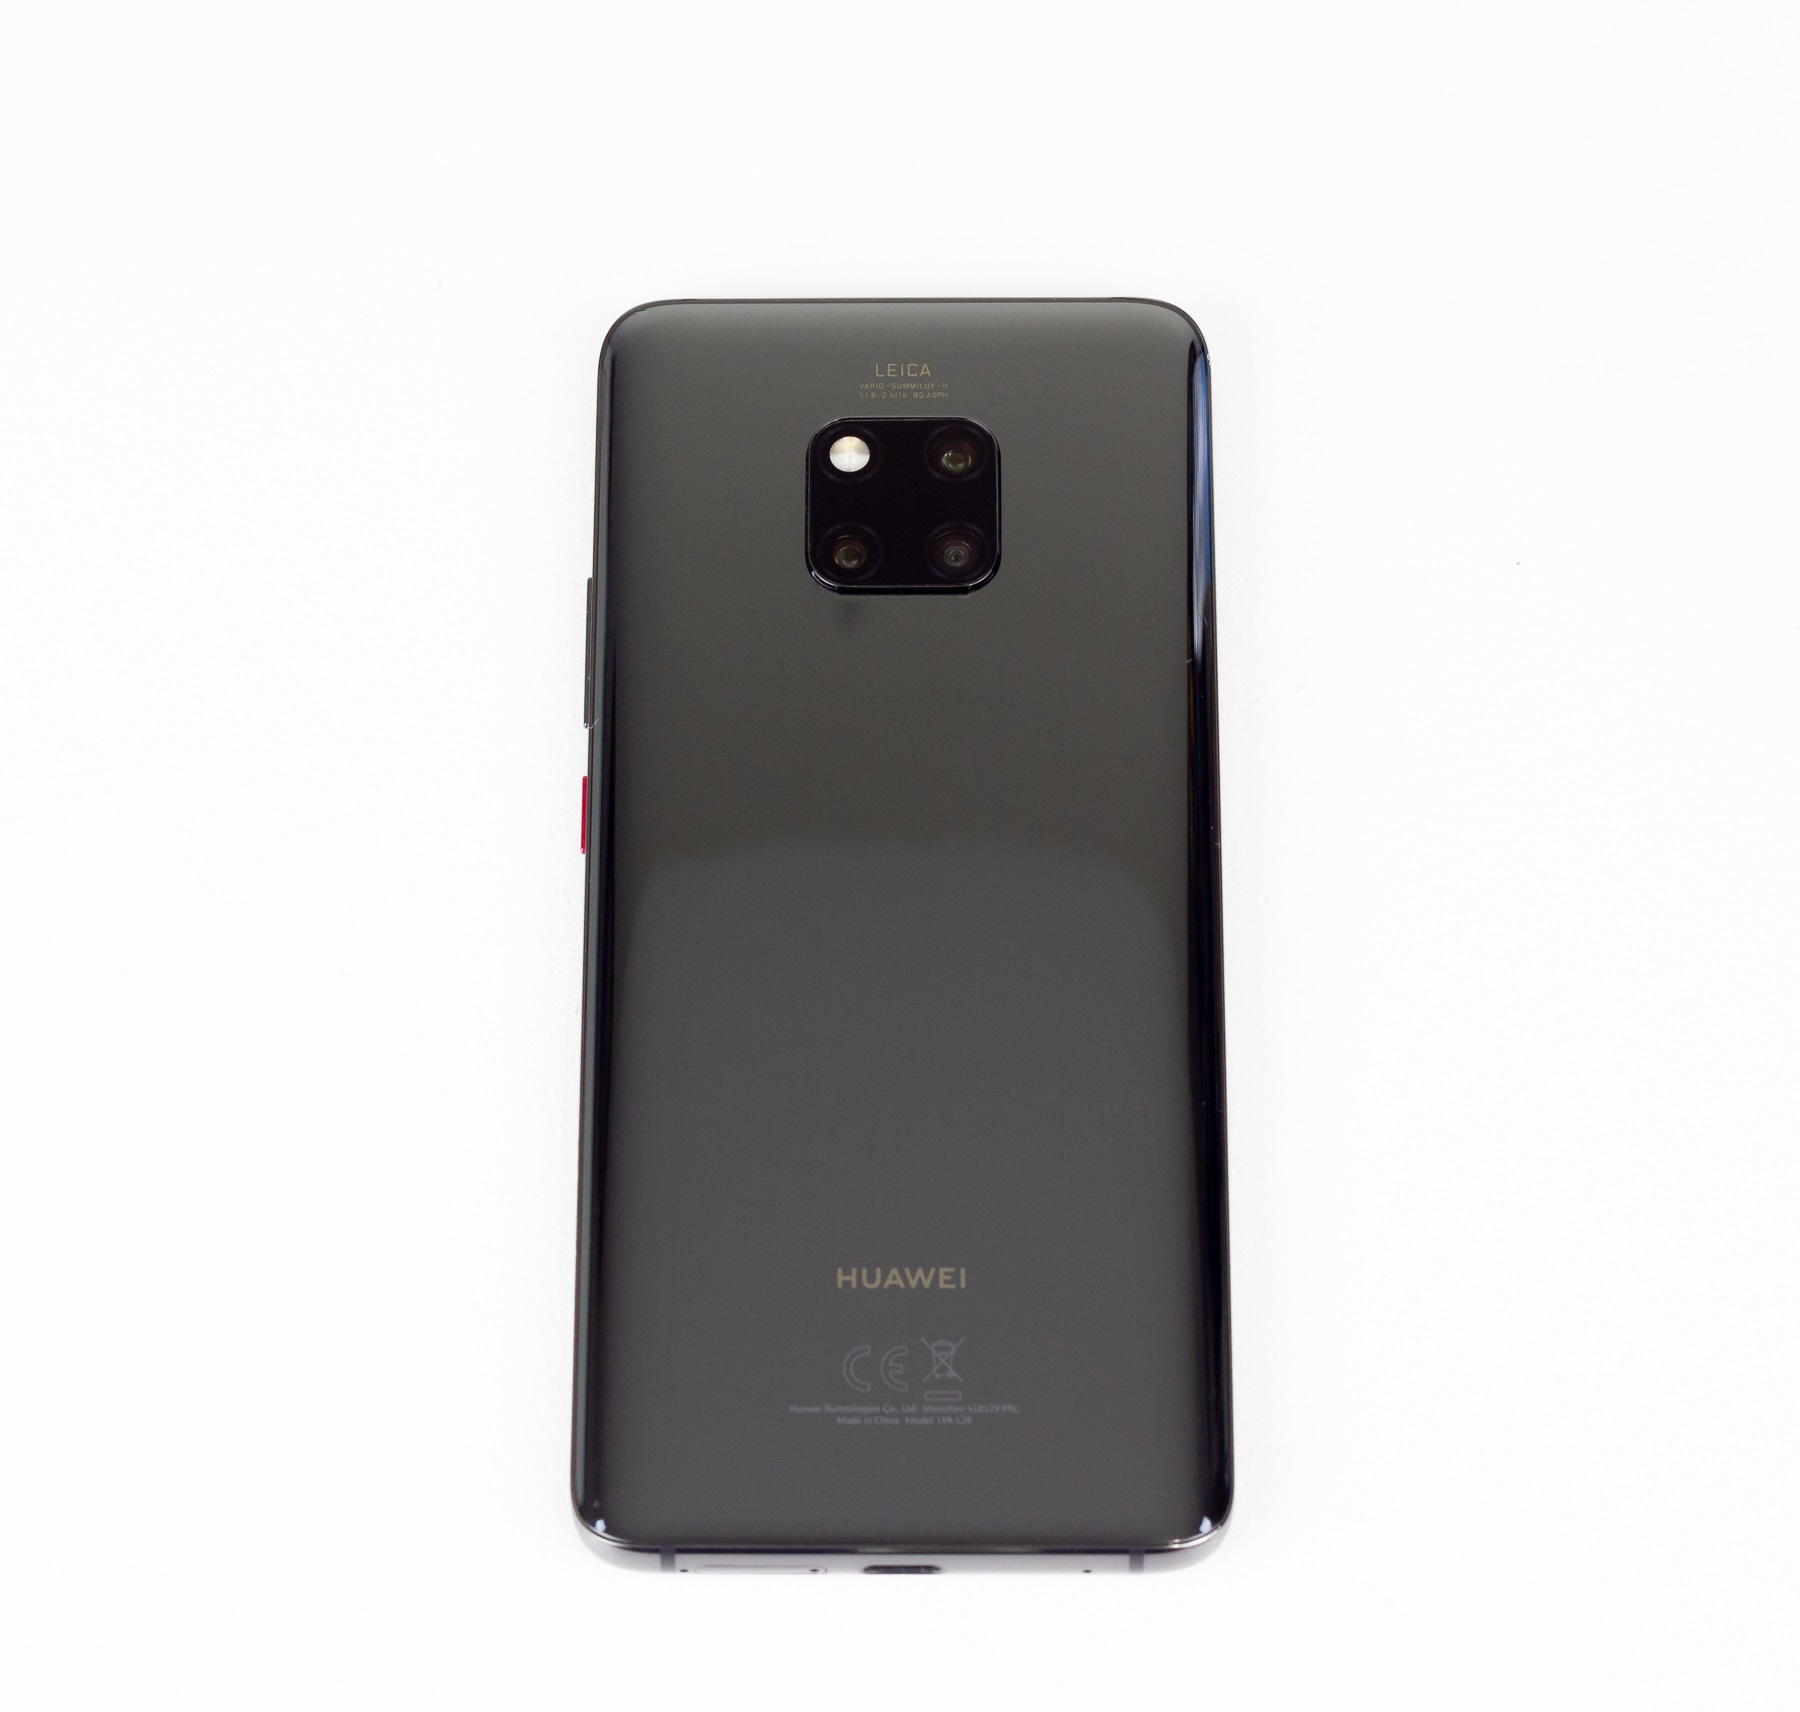 Huawei Mate 20 Pro review: the best Android option in Canada | IT Business